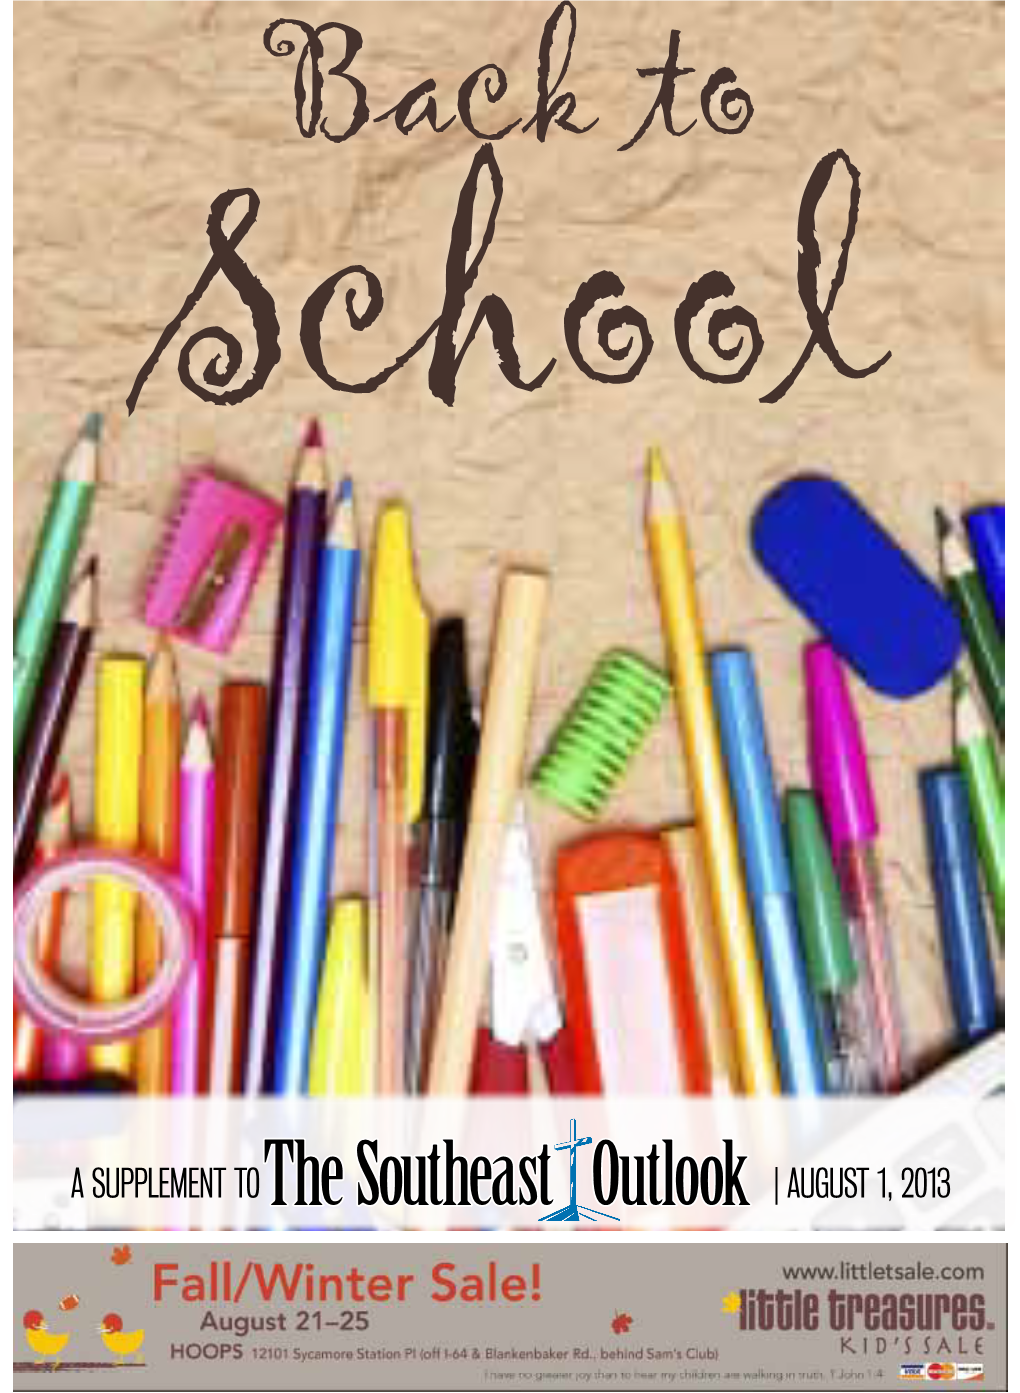 The Southeast Outlook | August 1, 2013 B22 Back to School AUGUST 1, 2013 | SOUTHEASTOUTLOOK.ORG ‘Not a Fan’ Resources Available for Teens